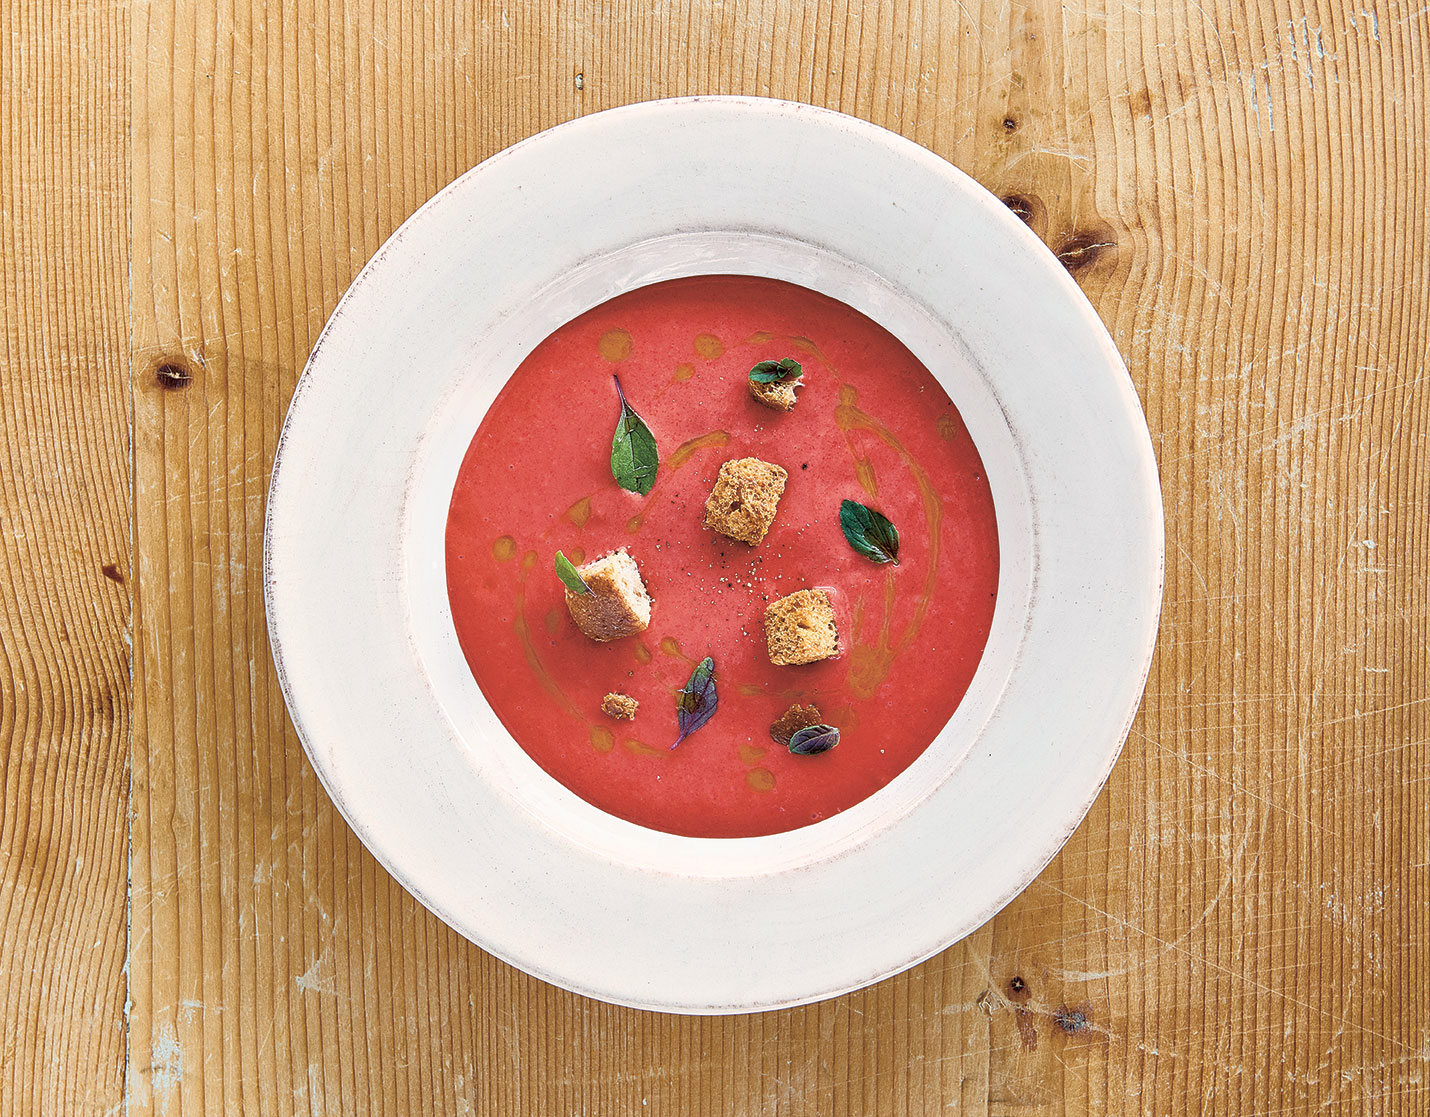 Daniel Humm's strawberry gazpacho, as featured in Bread is Gold